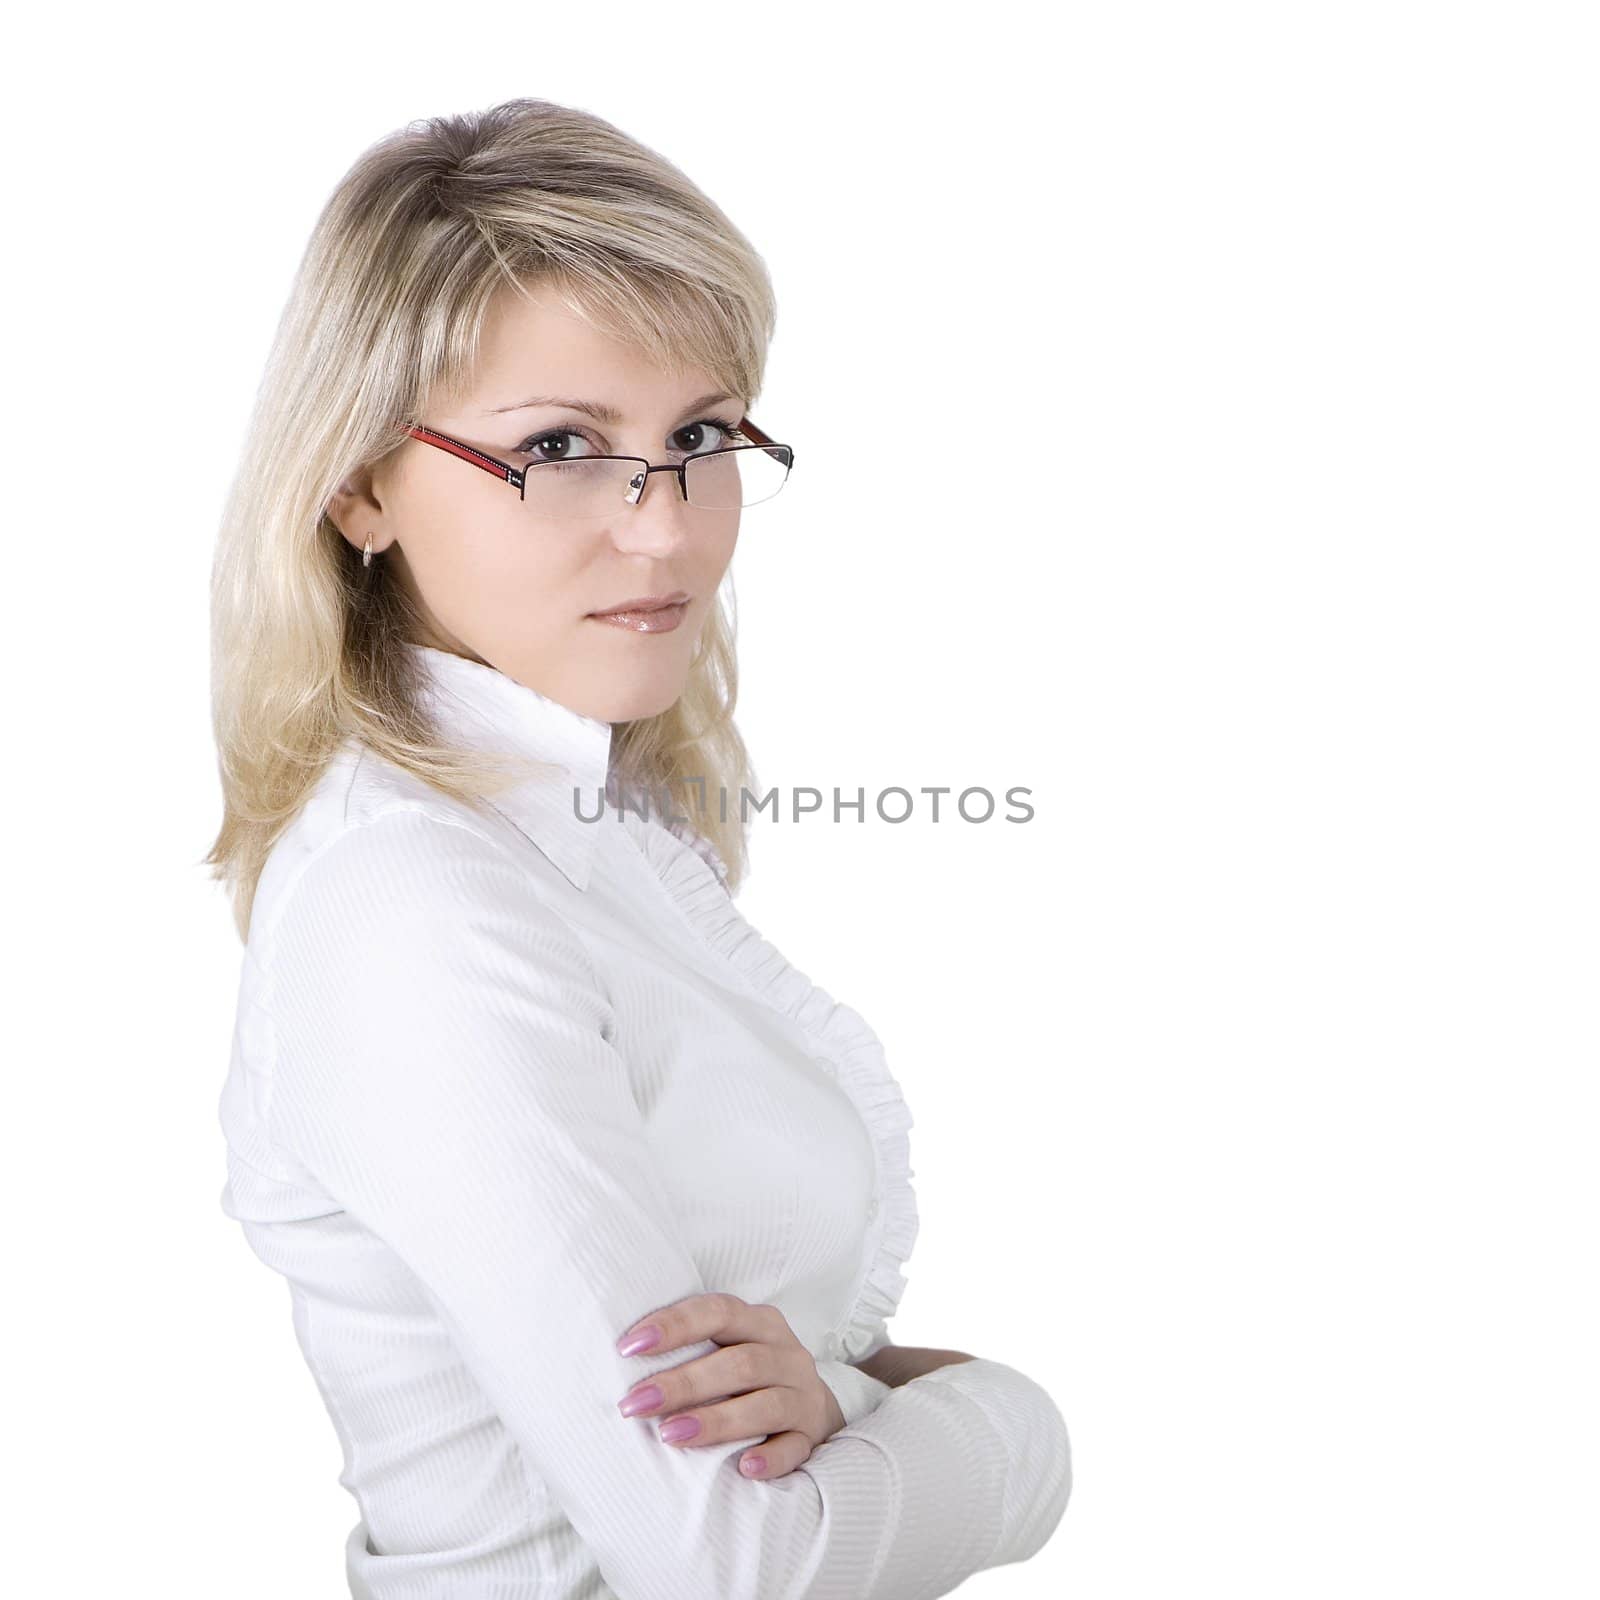 The business young woman in eyeglasses on a white background